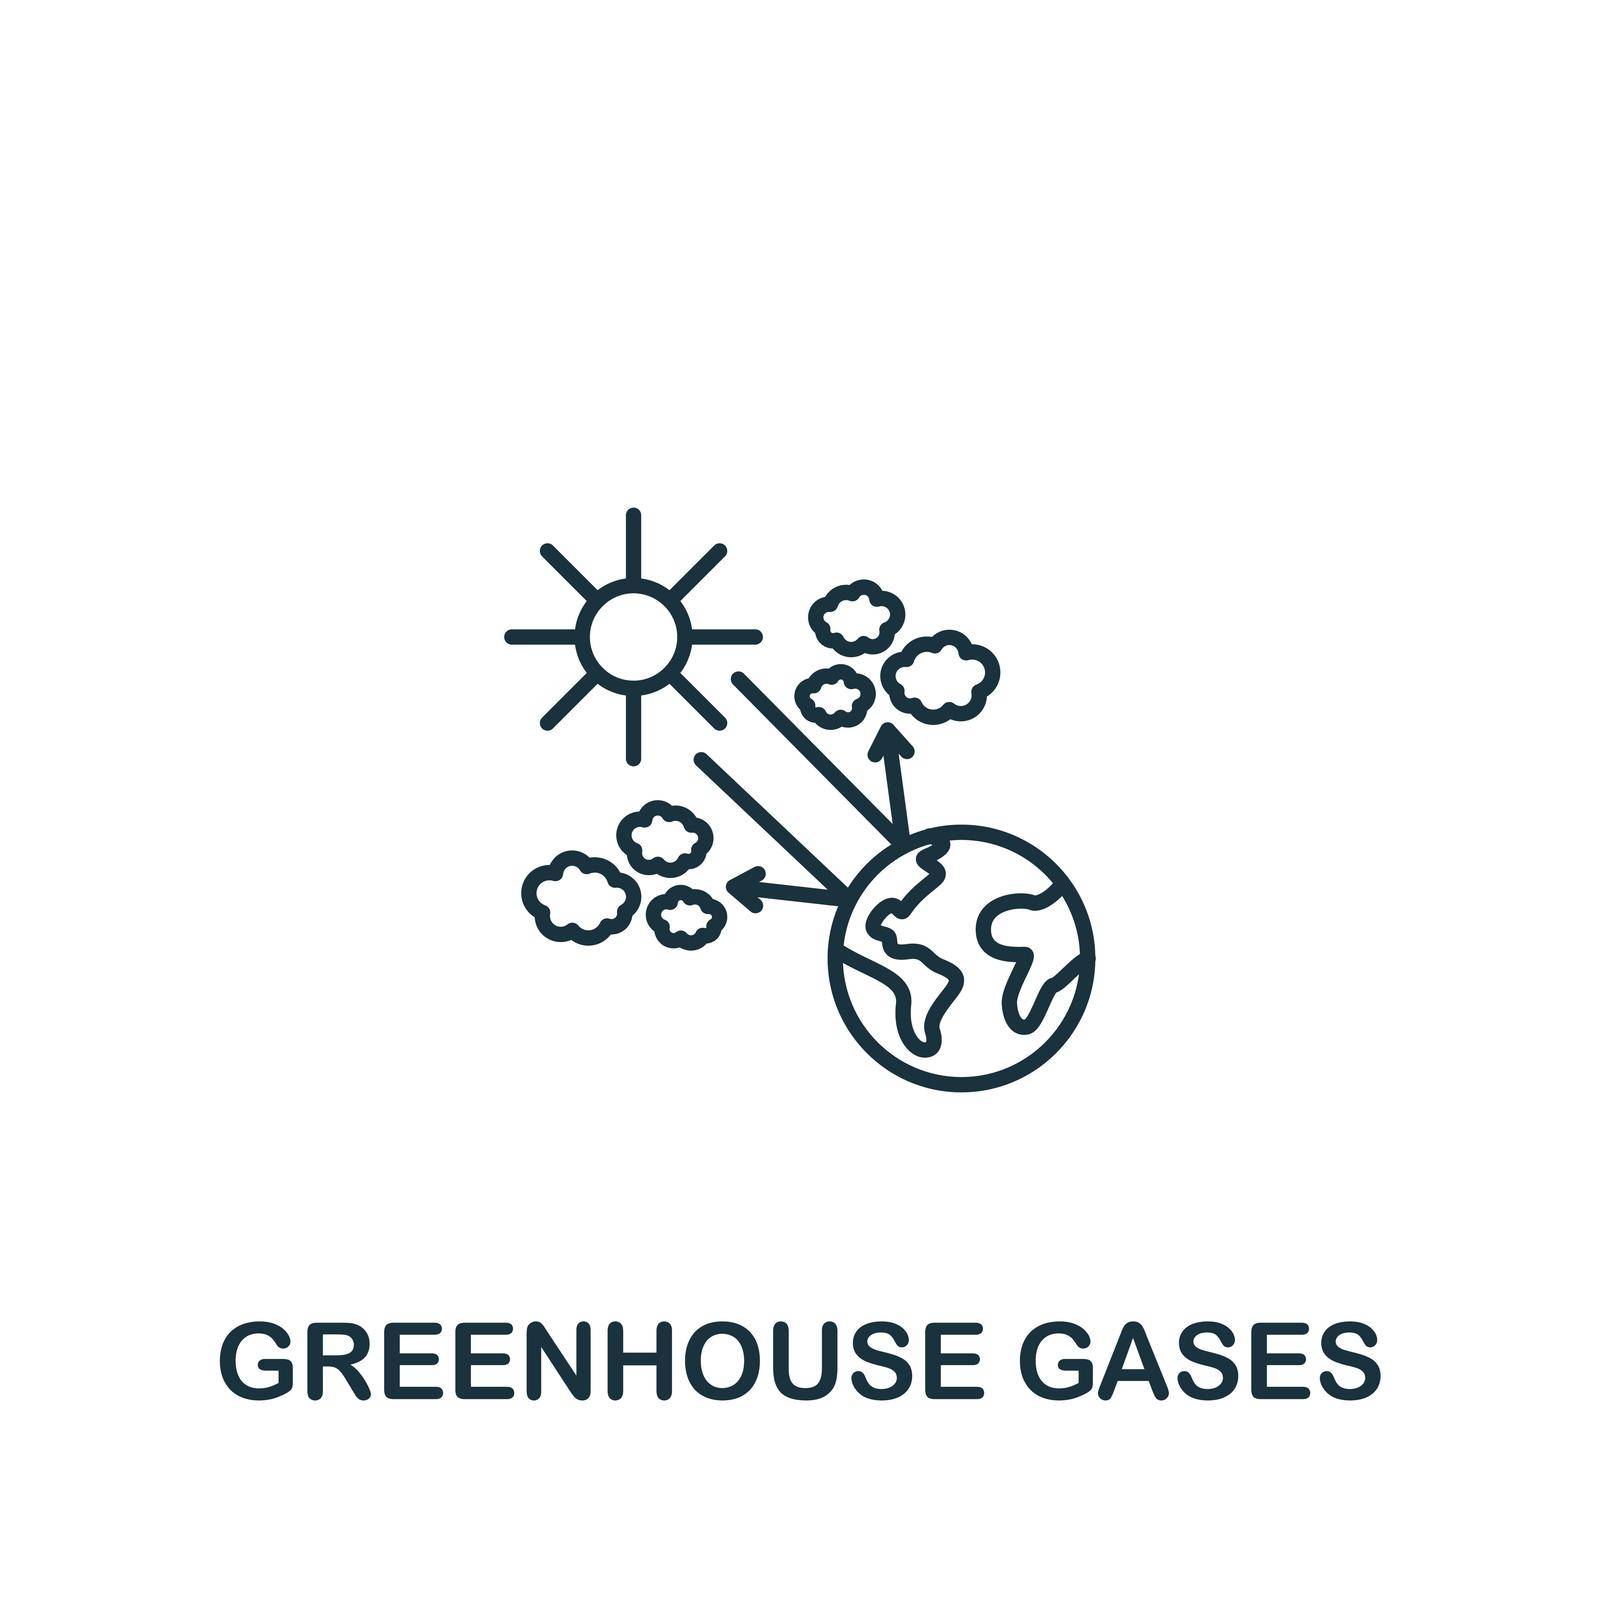 Greenhouse Gases icon. Monochrome simple icon for templates, web design and infographics by simakovavector